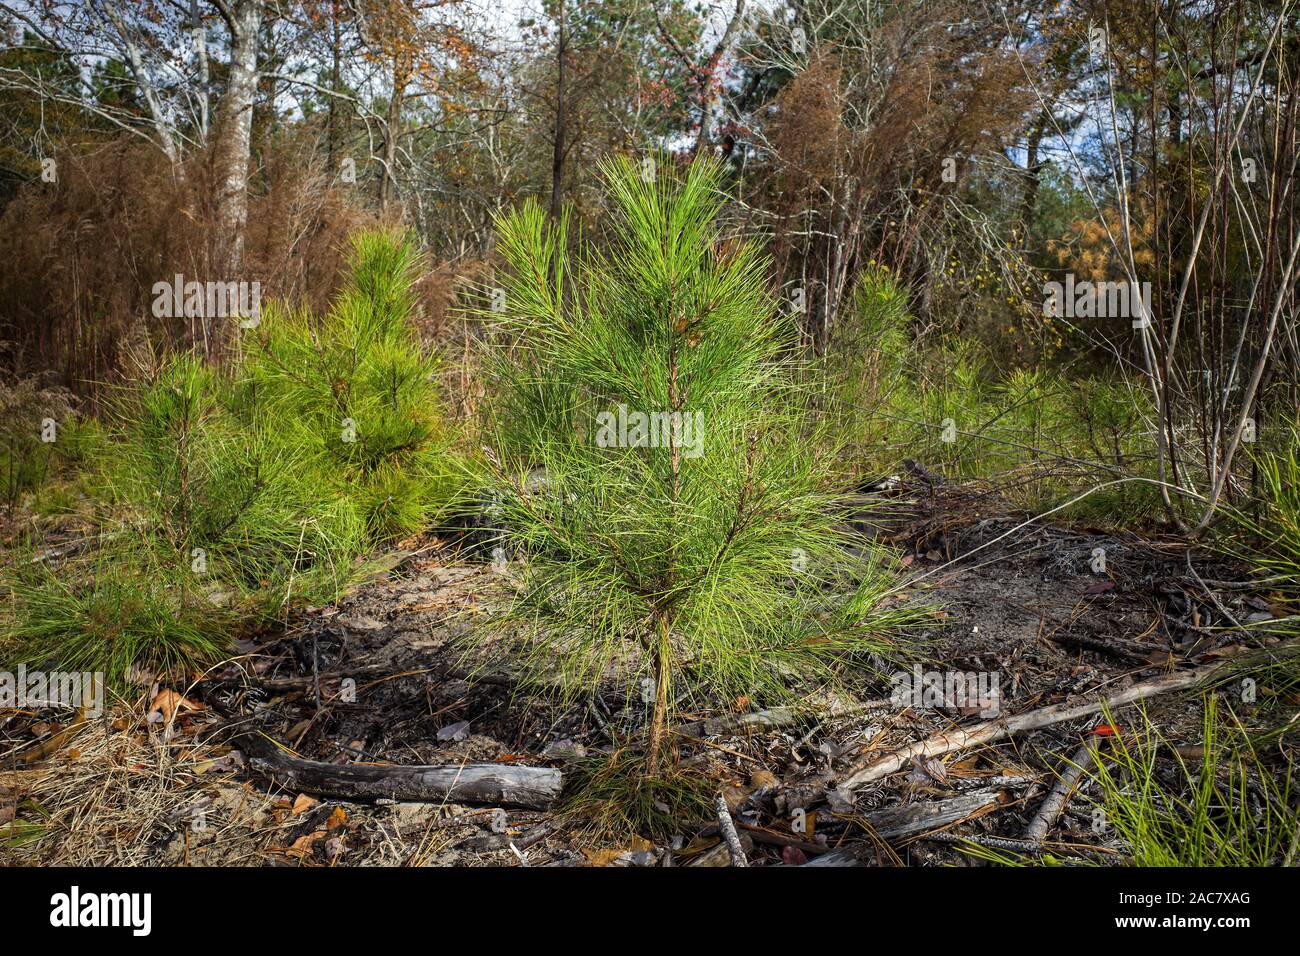 Regenerating loblolly pine forest devastated by the Southern pine beetle along the Virginia USA coast. Stock Photo